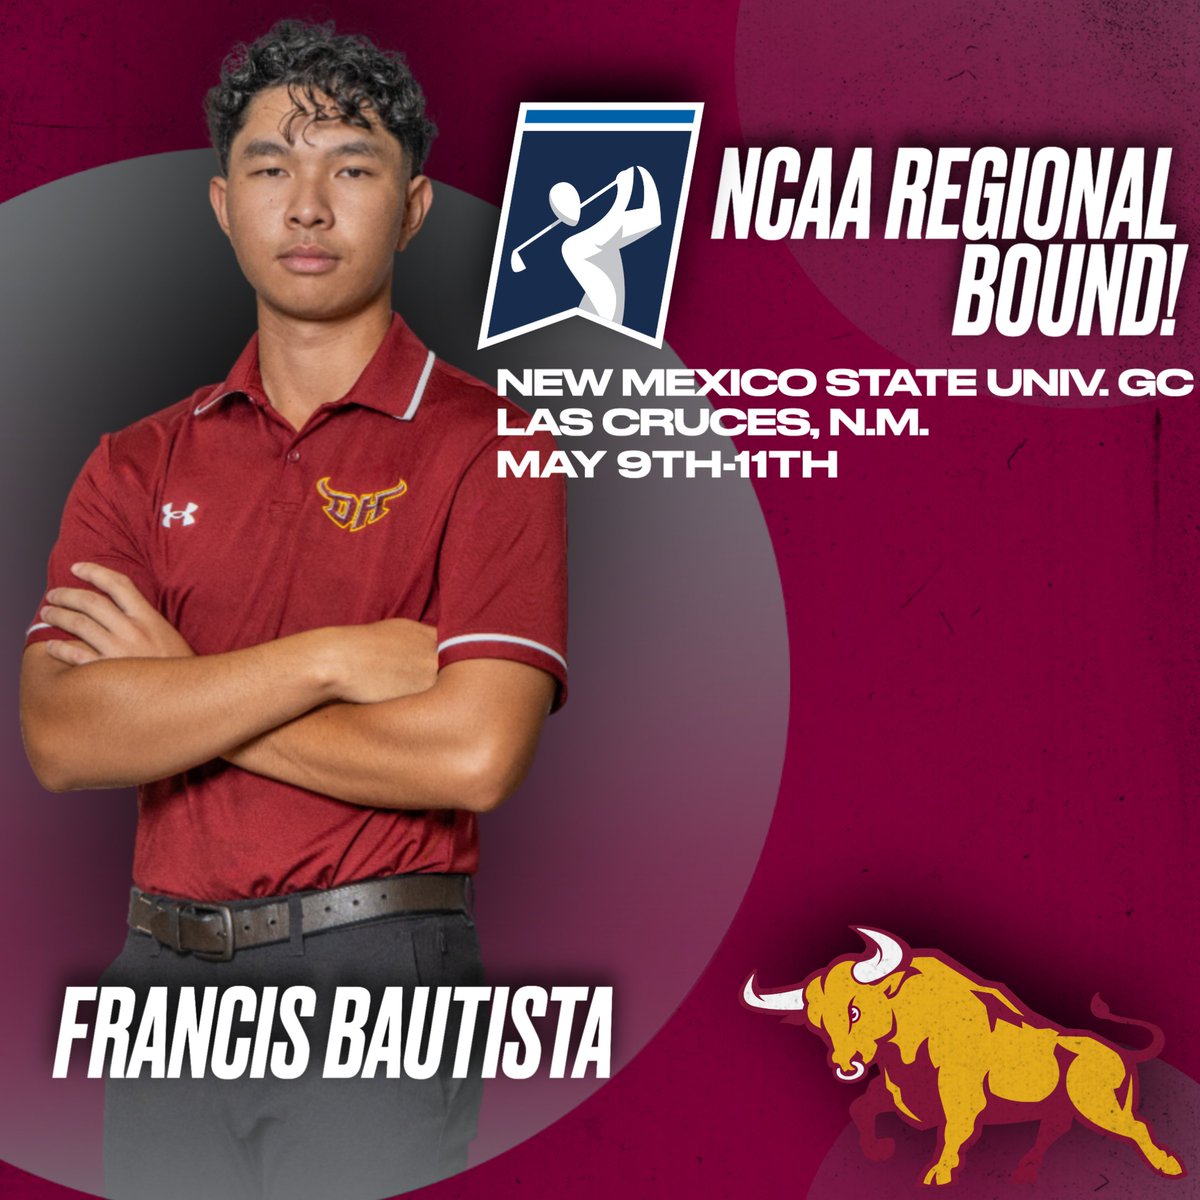 Francis Bautista will represent @CSUDHgolf as he competes in the NCAA Regionals! Bautista qualified in the top spot as an individual in the West Region!